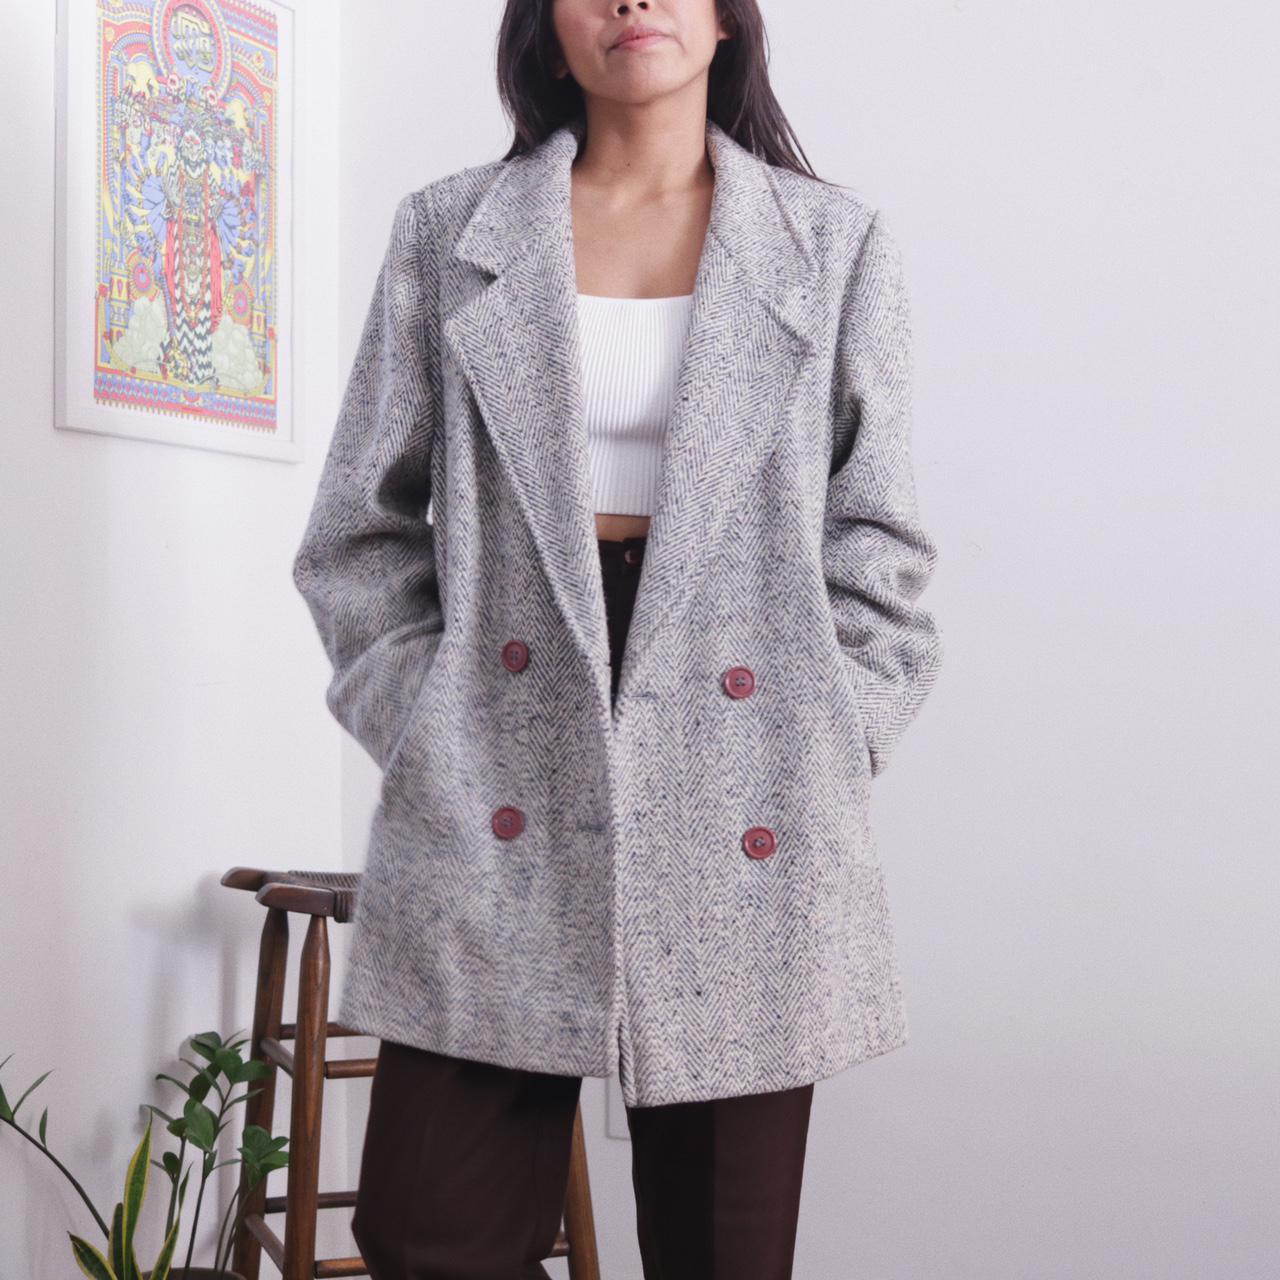 American Vintage Women's Grey and Blue Coat